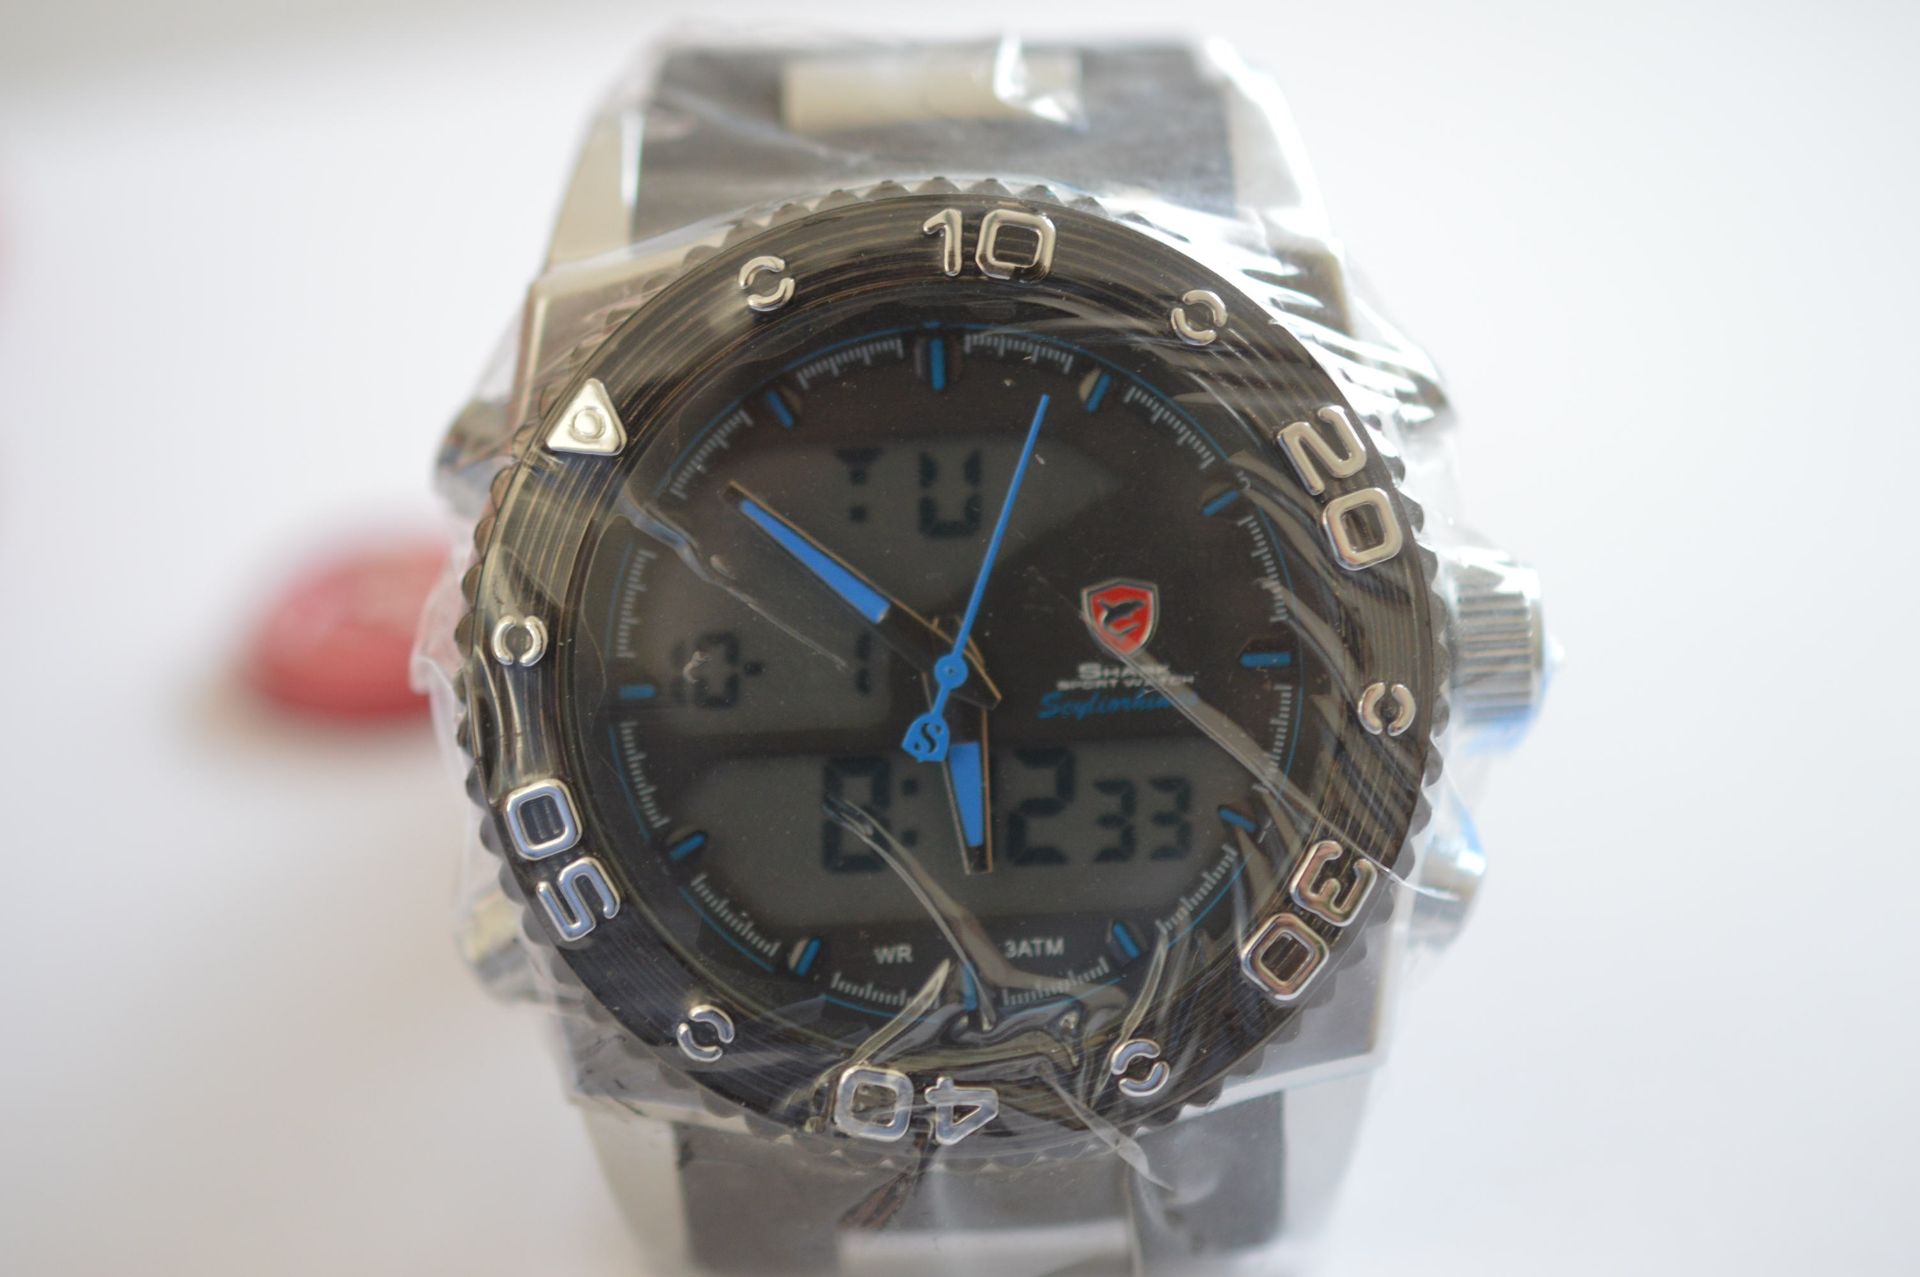 BRAND NEW IN BOX SHARK MENS DIGITAL / ANALOGUE WRIST WATCH - IN GOOD WORKING ORDER *NO VAT* - Image 2 of 8